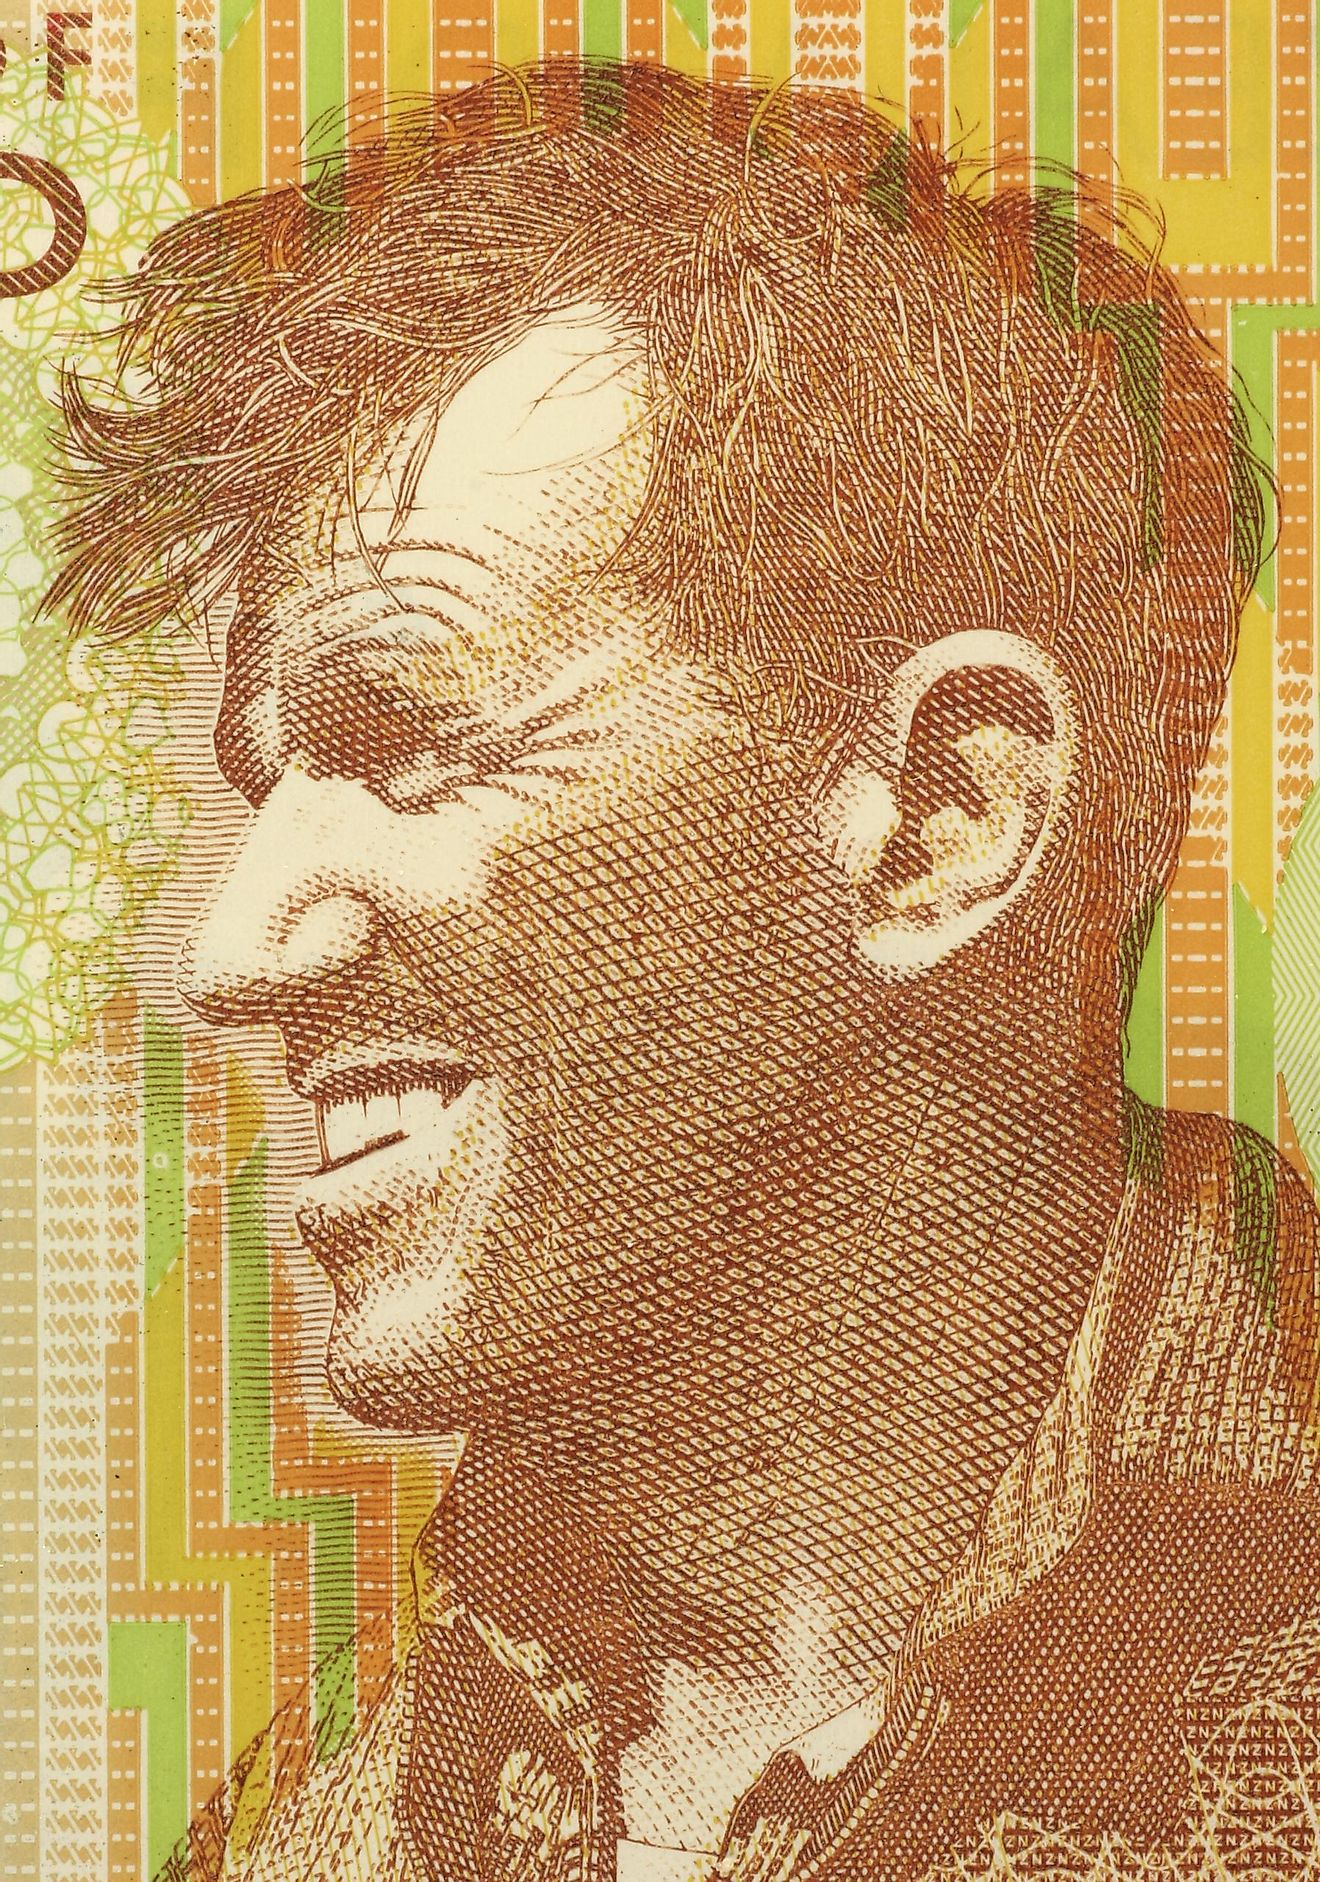 As attested to by inumerable stamps, plaques, and movies dedicated to him around his home country, Edmund Hillary remains a New Zealand cultural icon to this day.